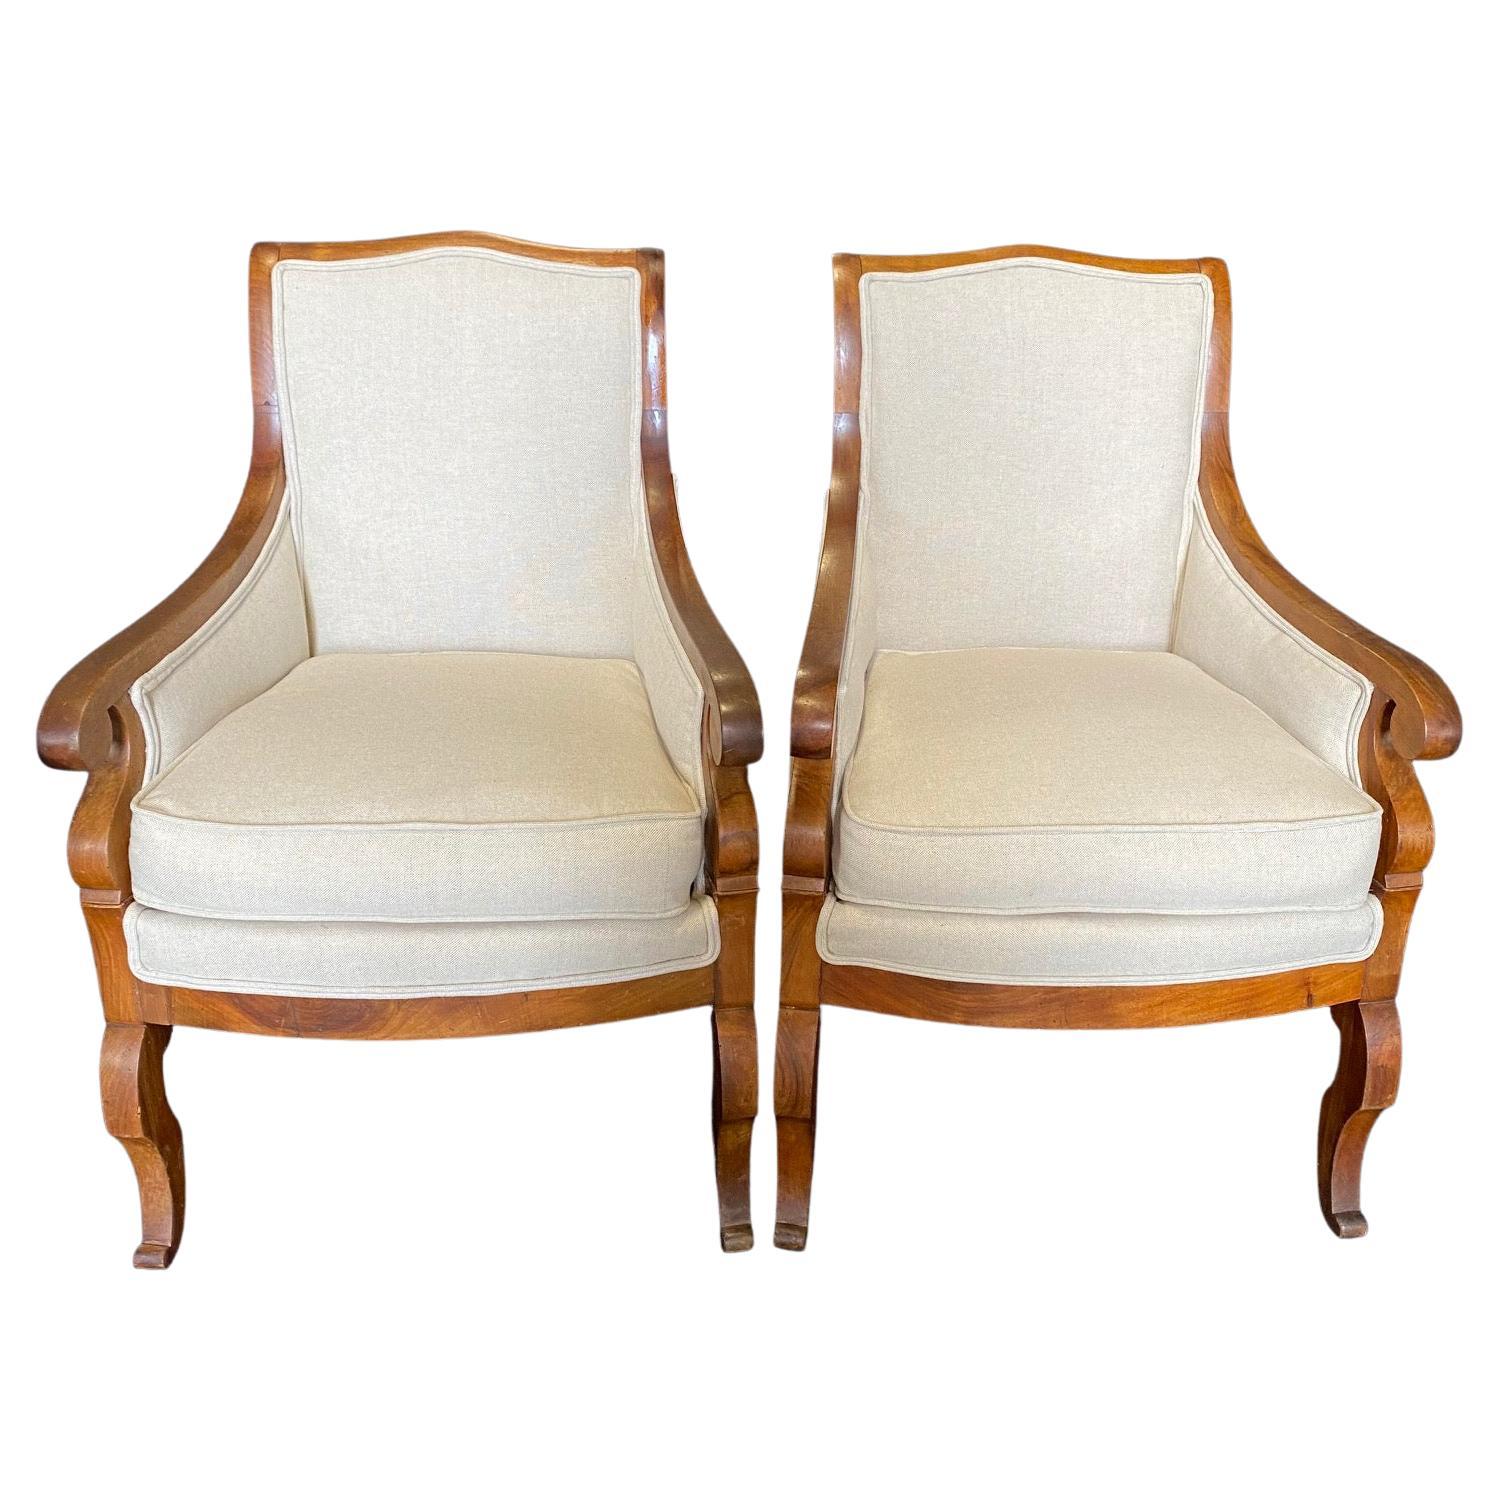 Pair of French 19th Century Walnut Neoclassical Empire Restoration Armchairs